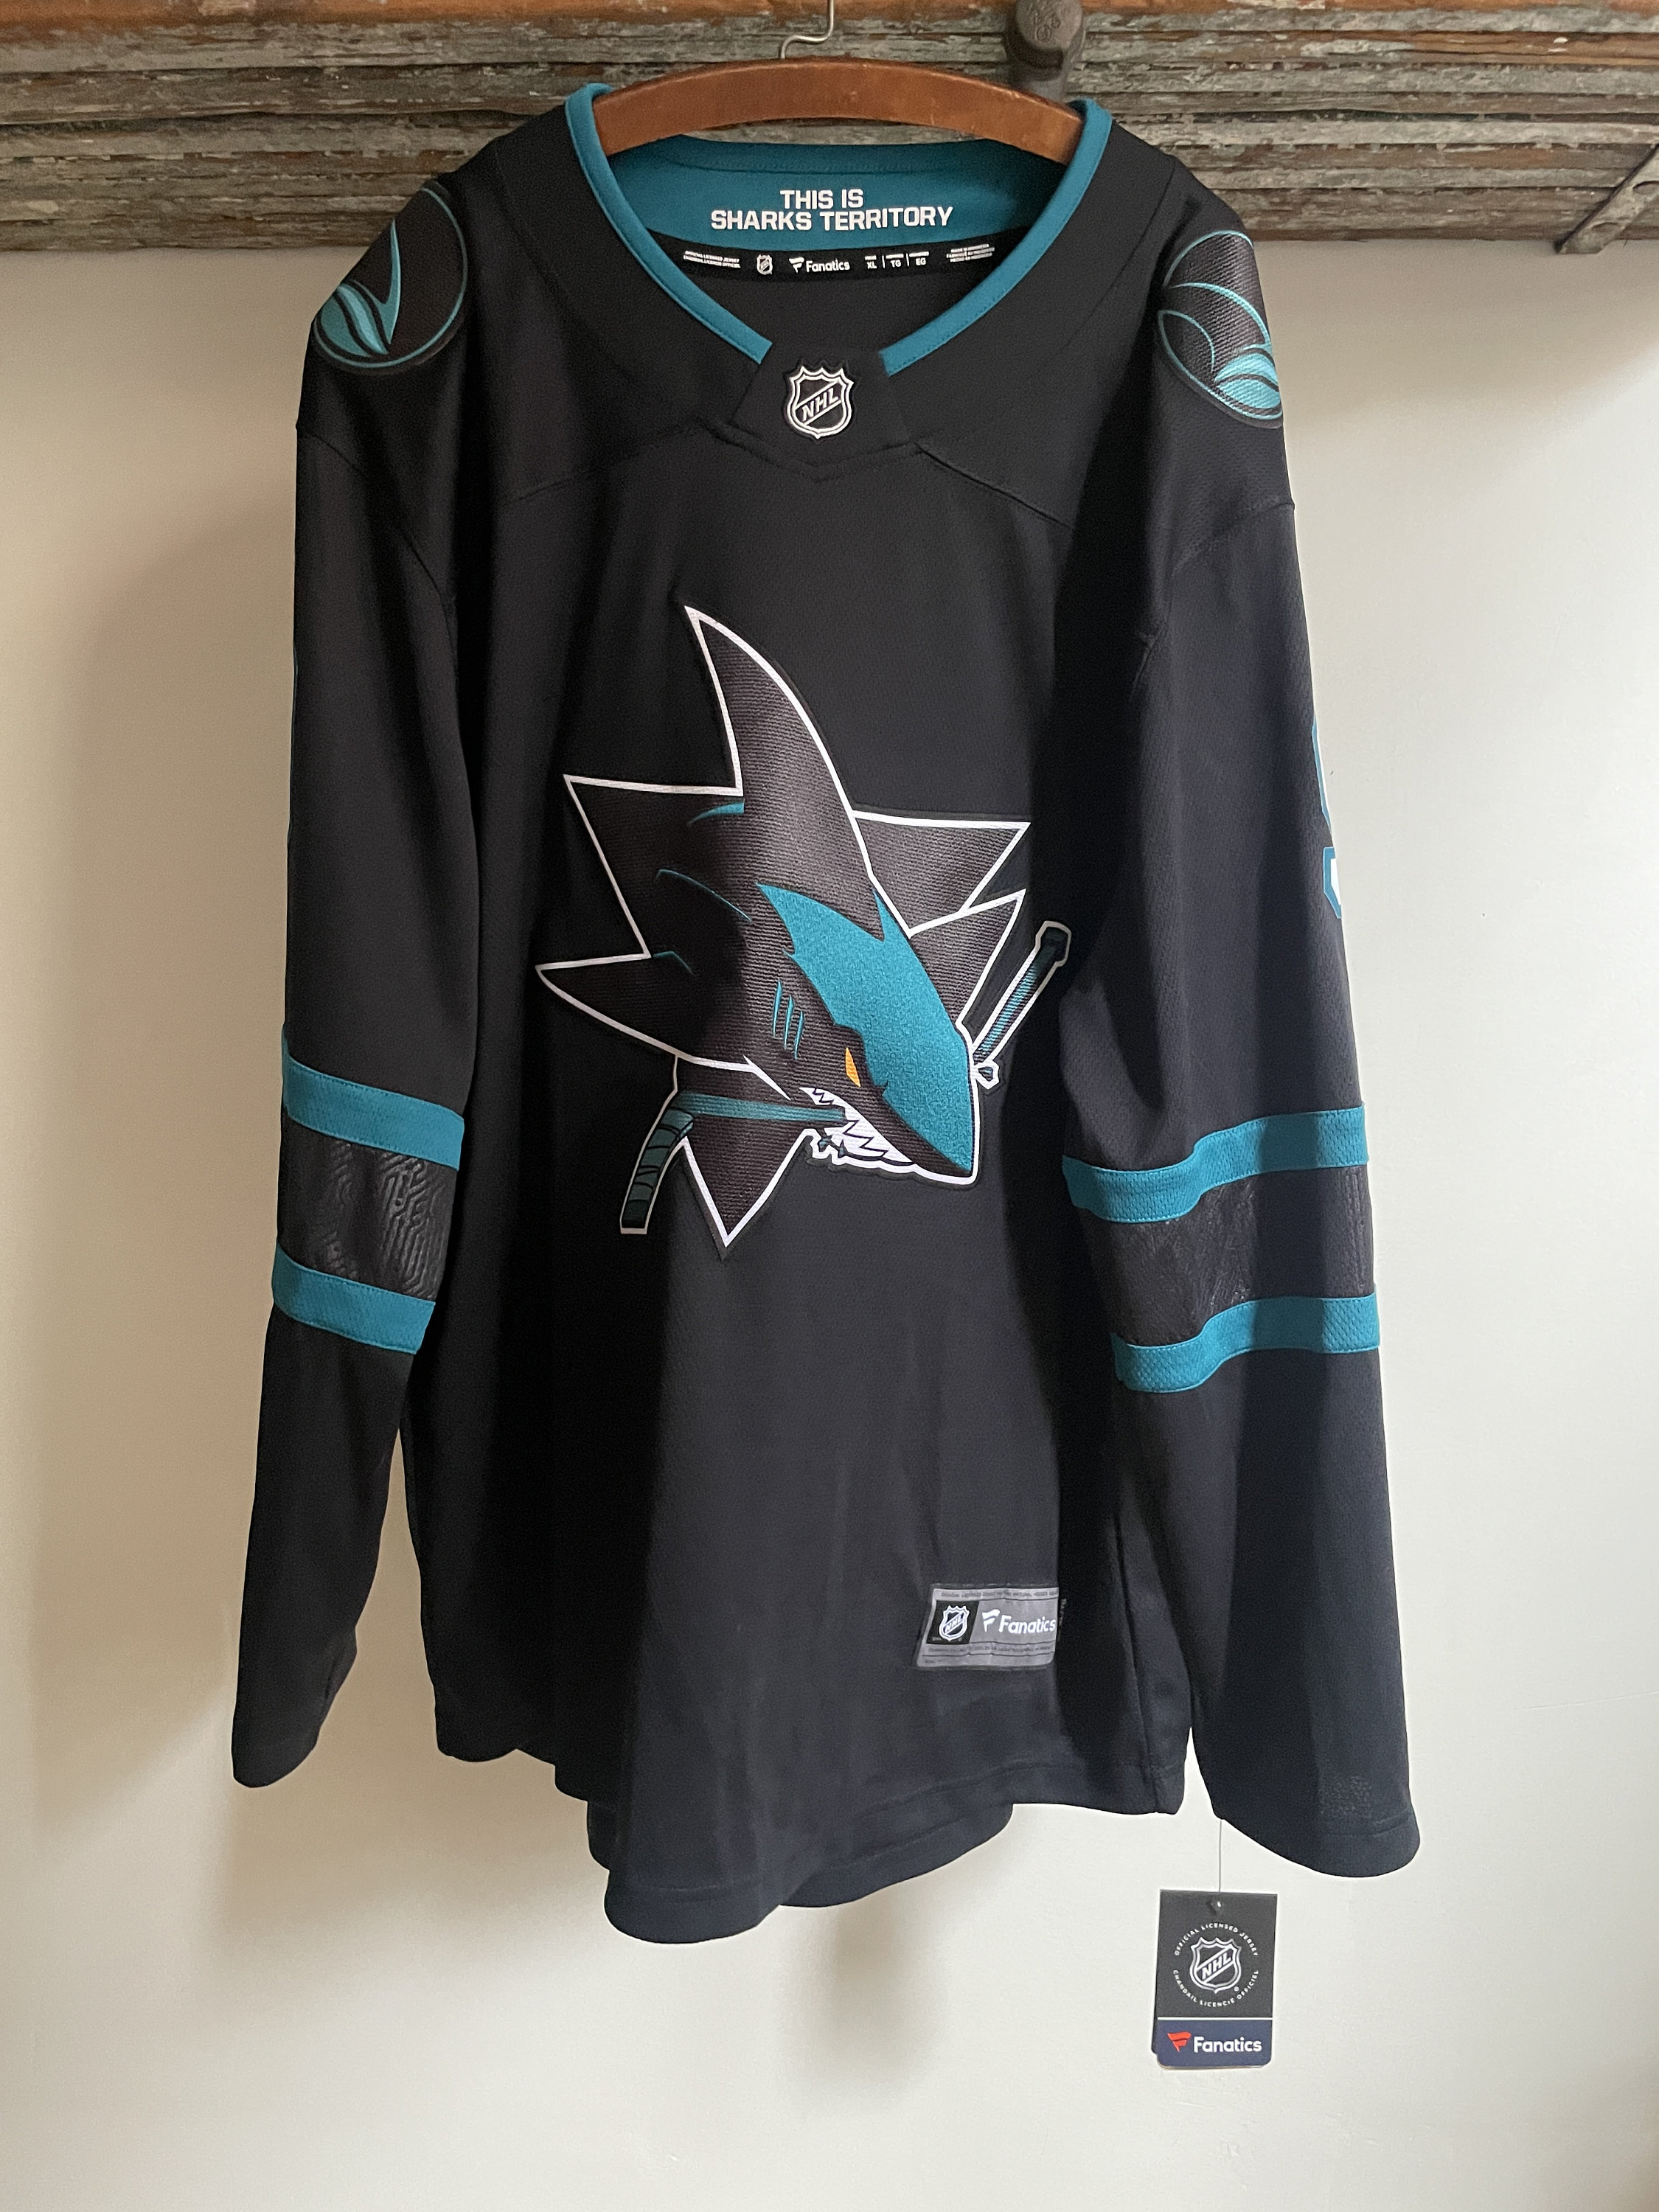  San Jose Sharks Blank White Youth Away Premier Team Jersey :  Sports & Outdoors